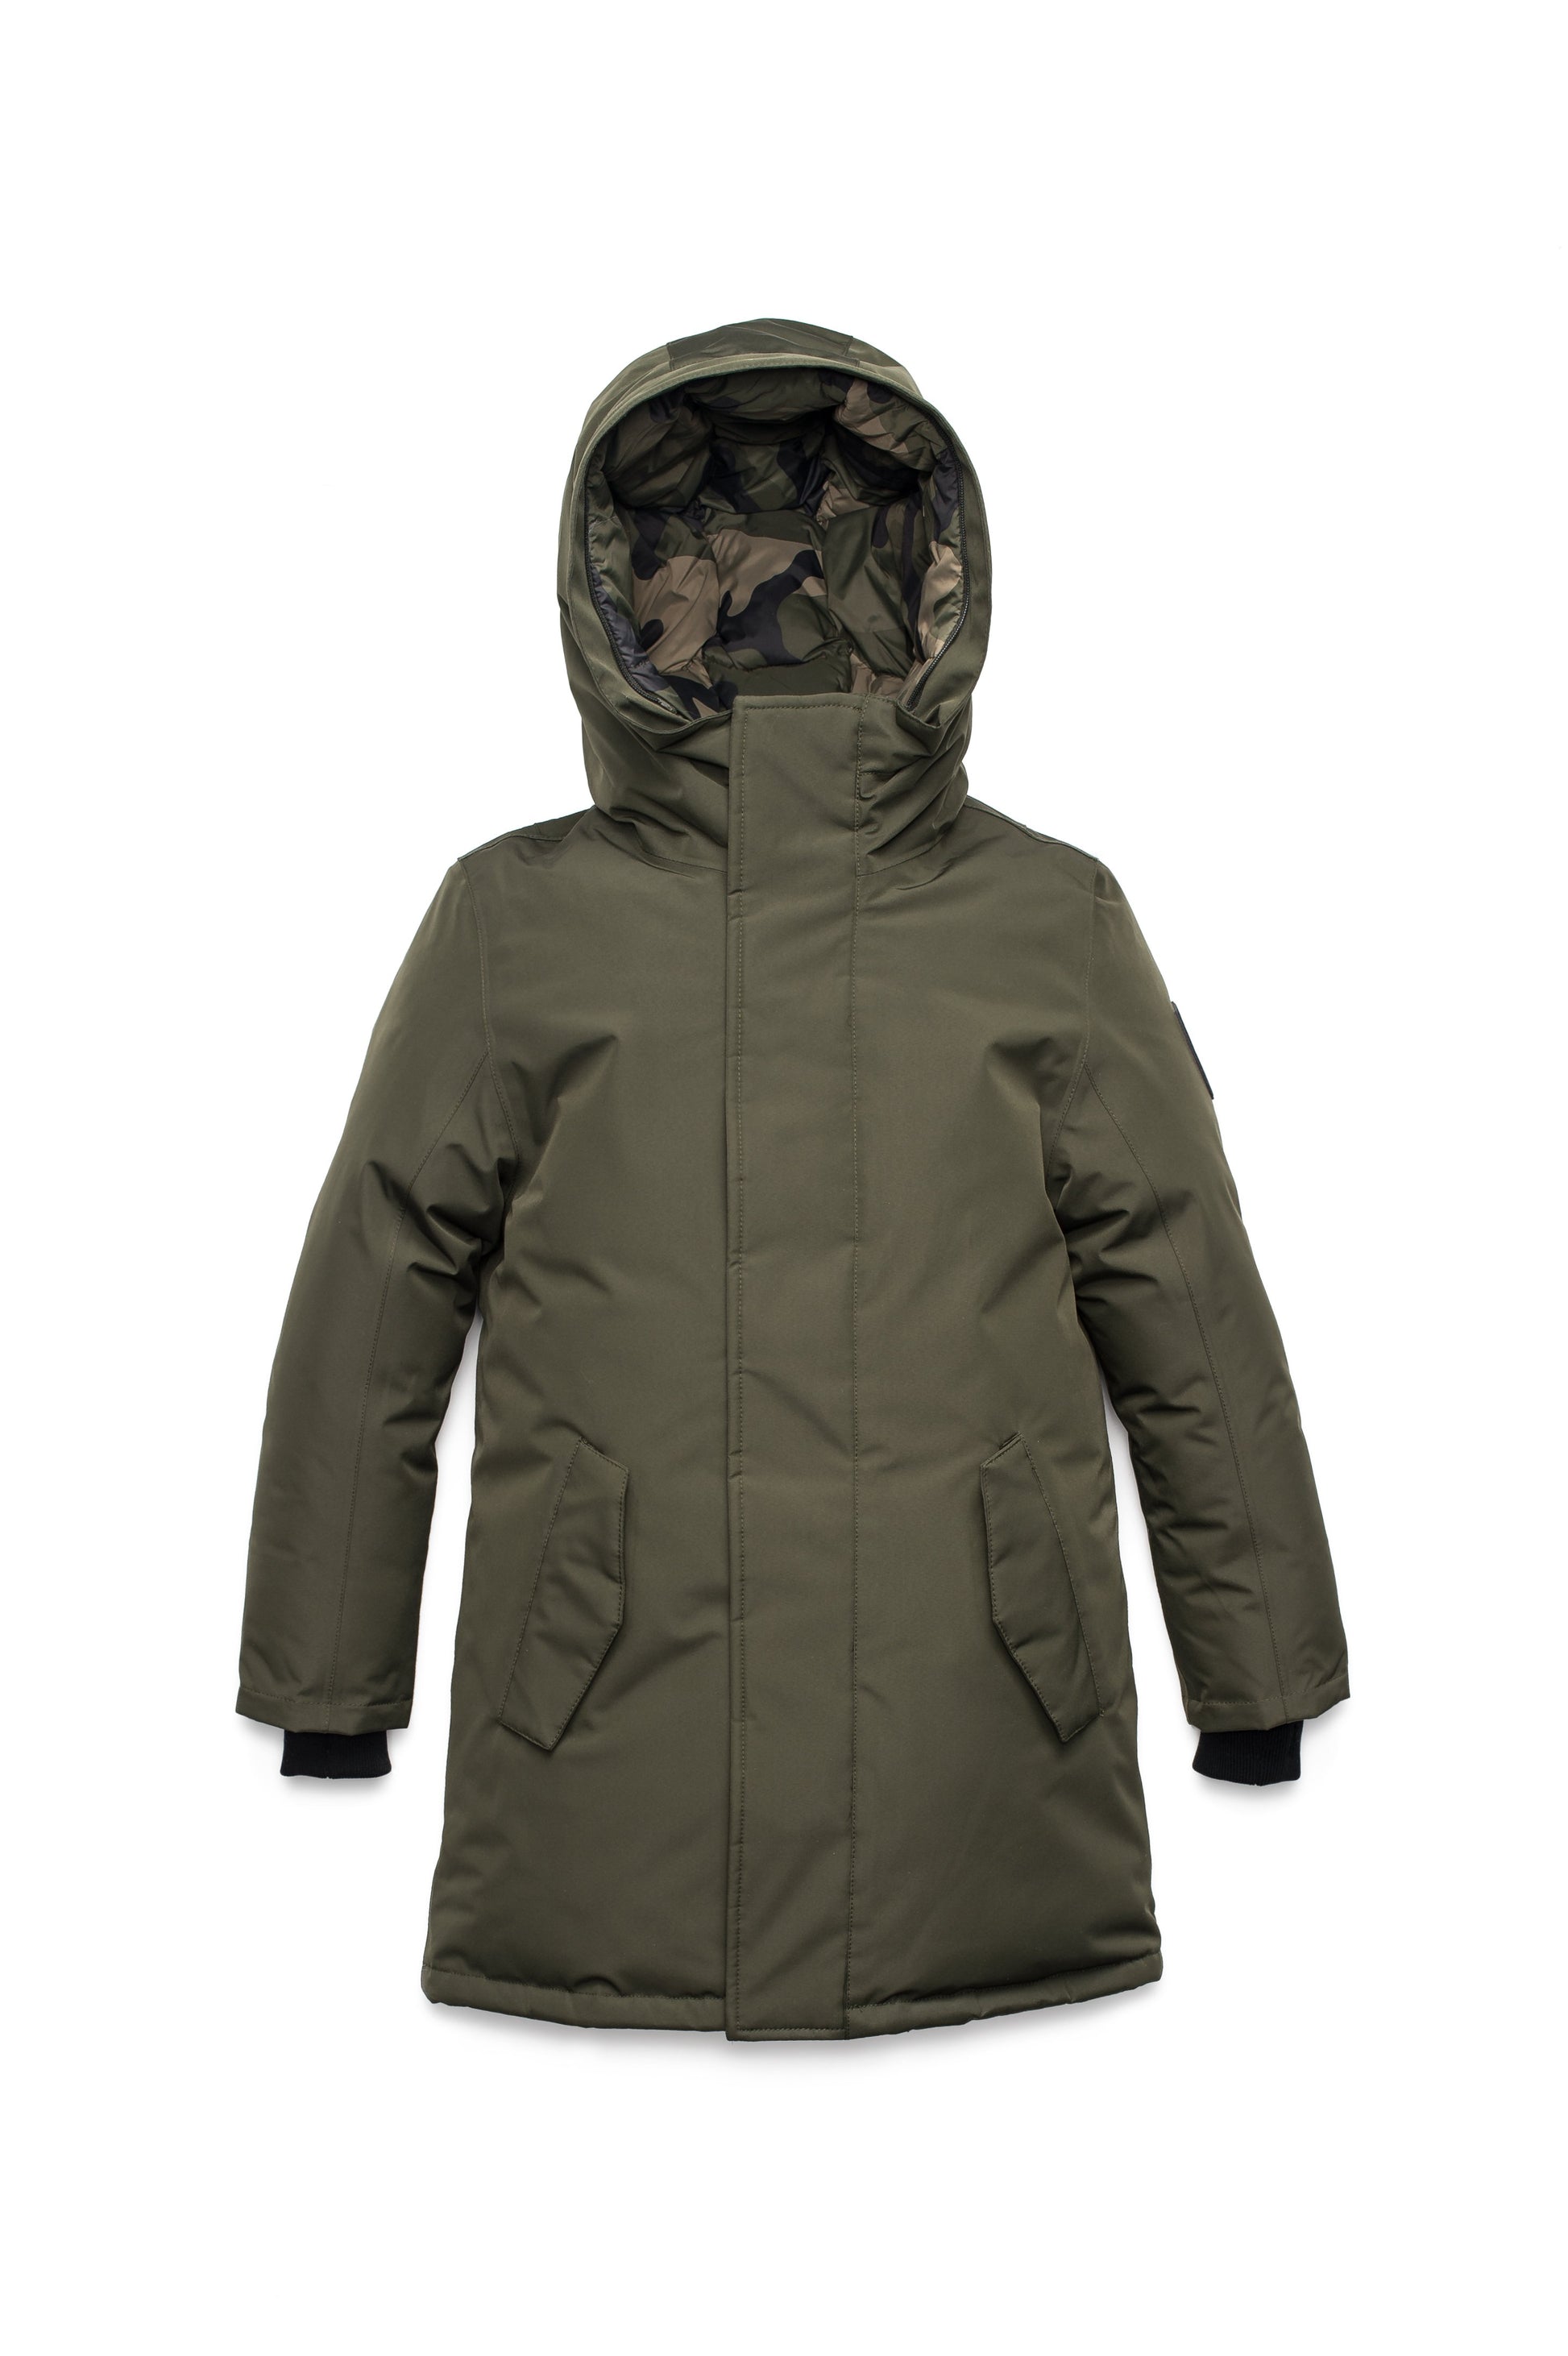 Kids' thigh length down-filled parka with non-removable hood and removable coyote fur trim in Fatigue